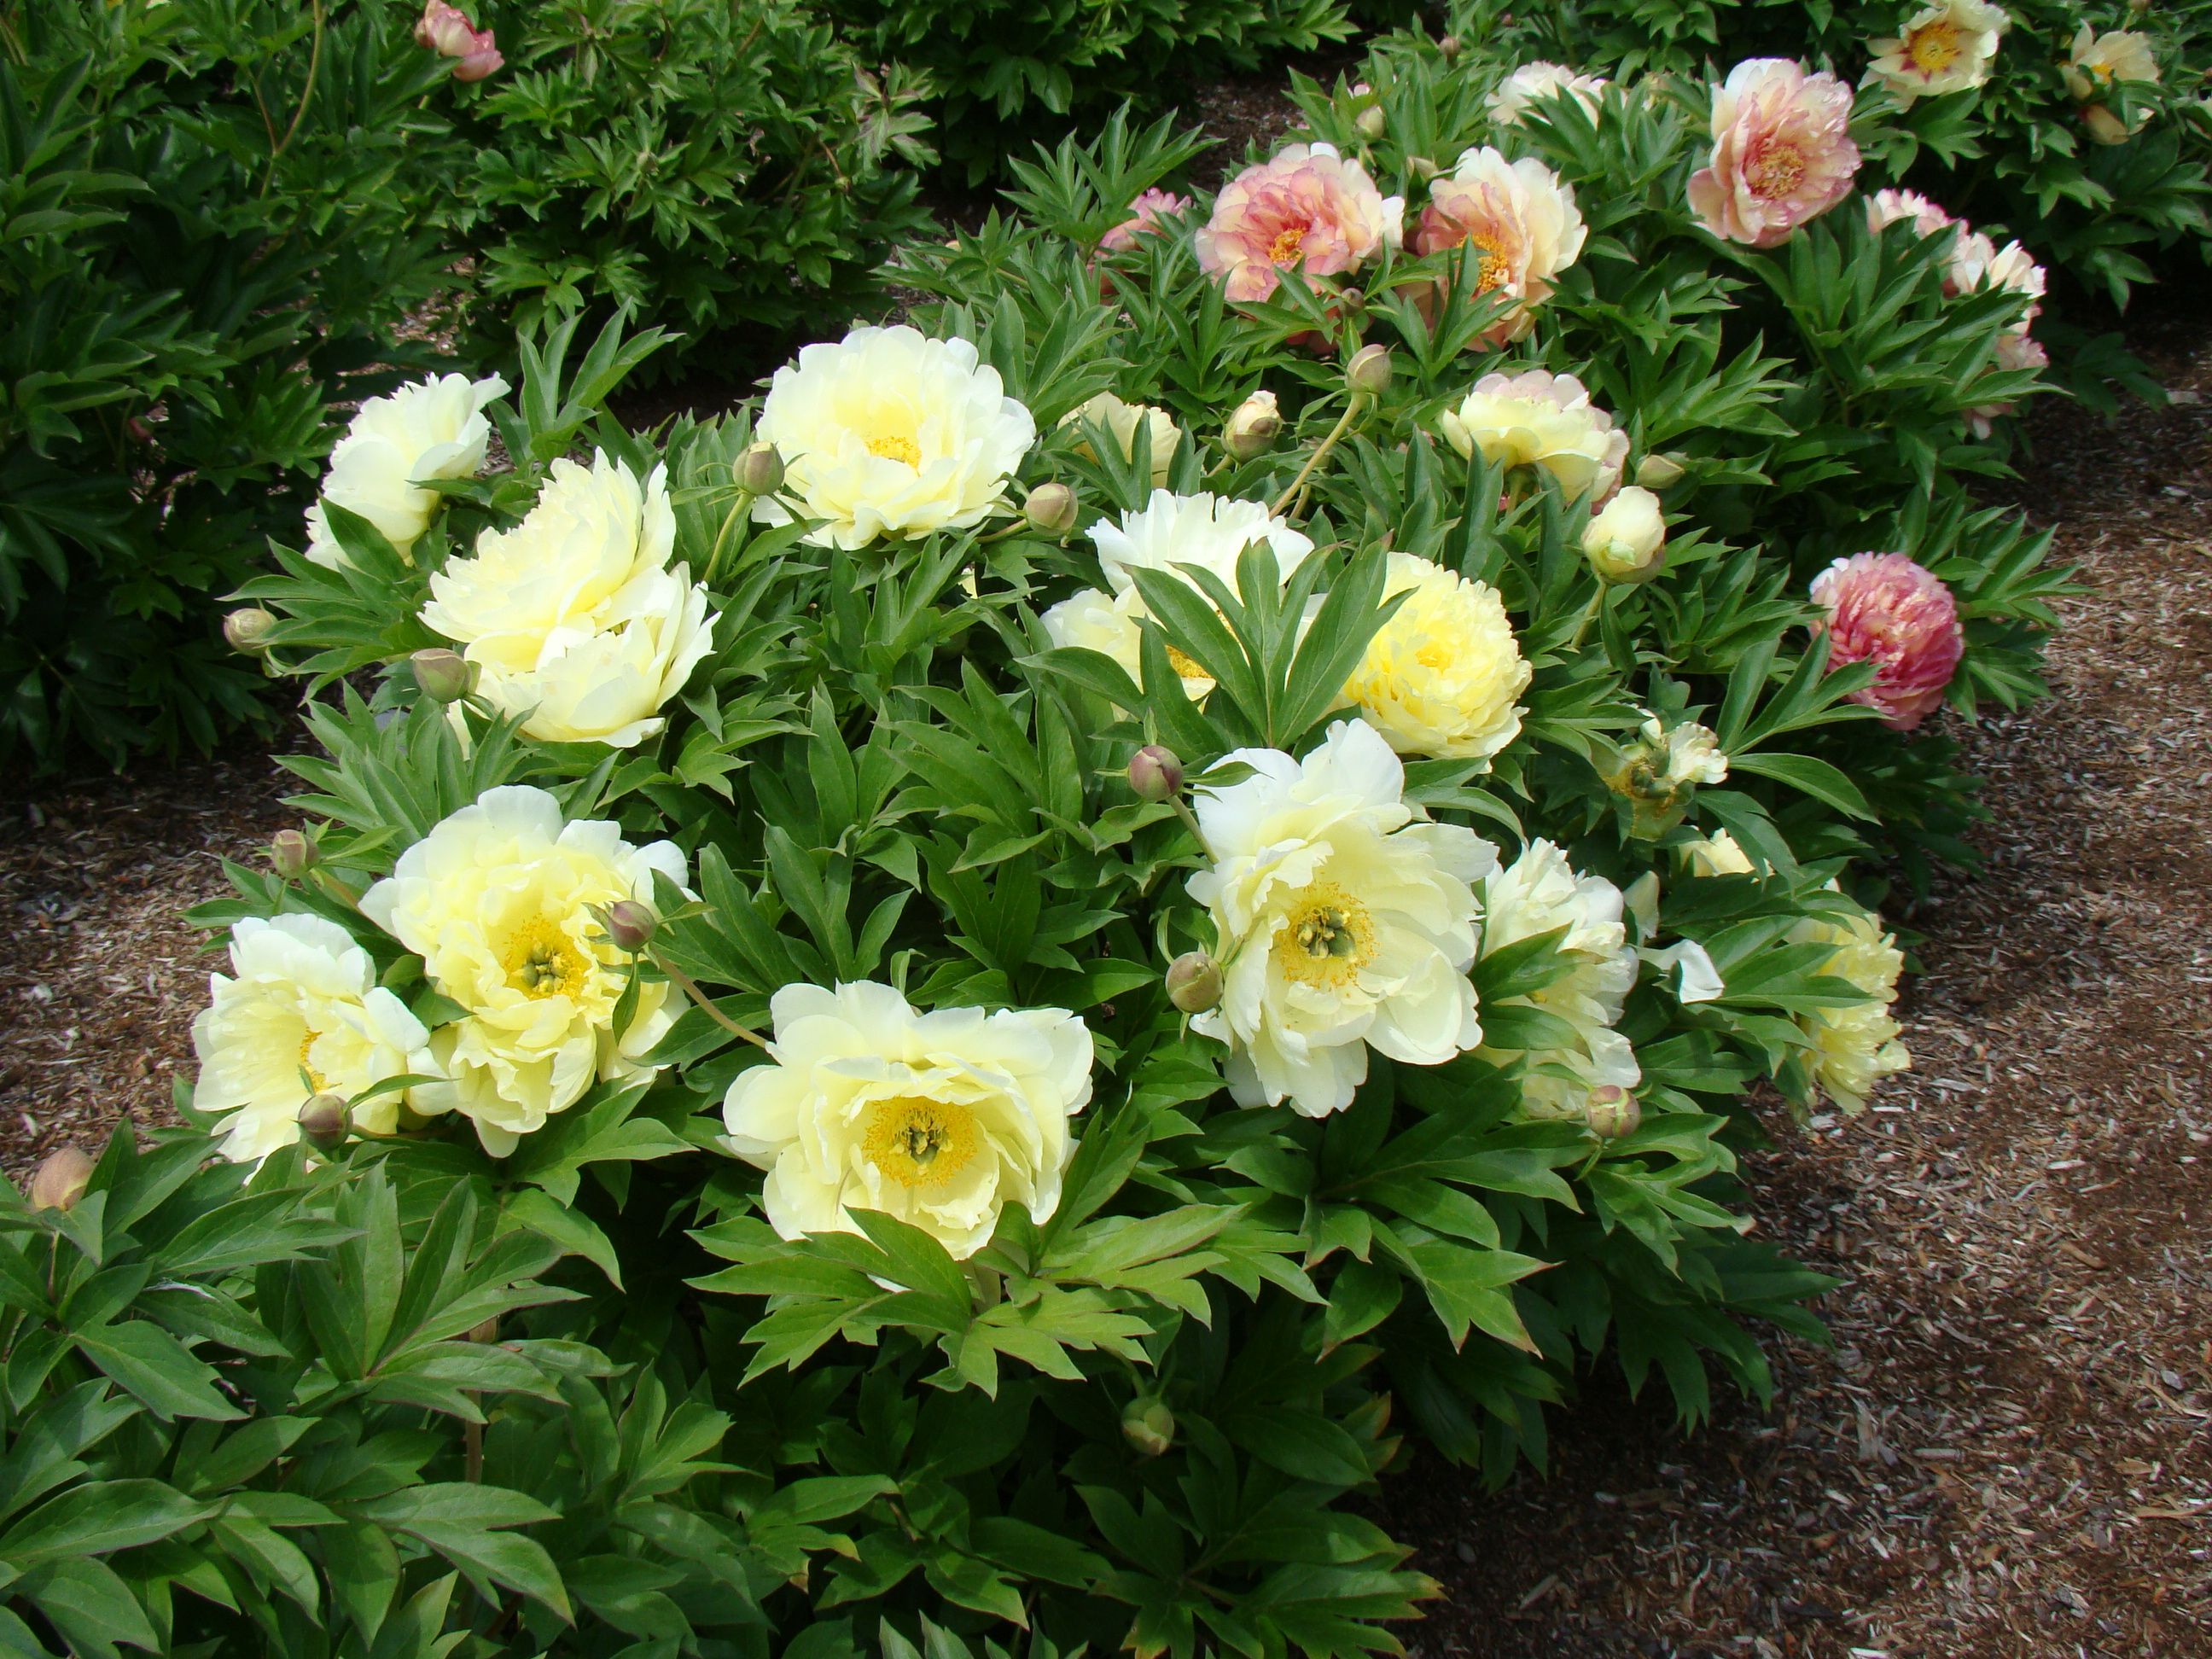 images/plants/paeonia/pae-golden-ticket/pae-golden-ticket-0006.JPG